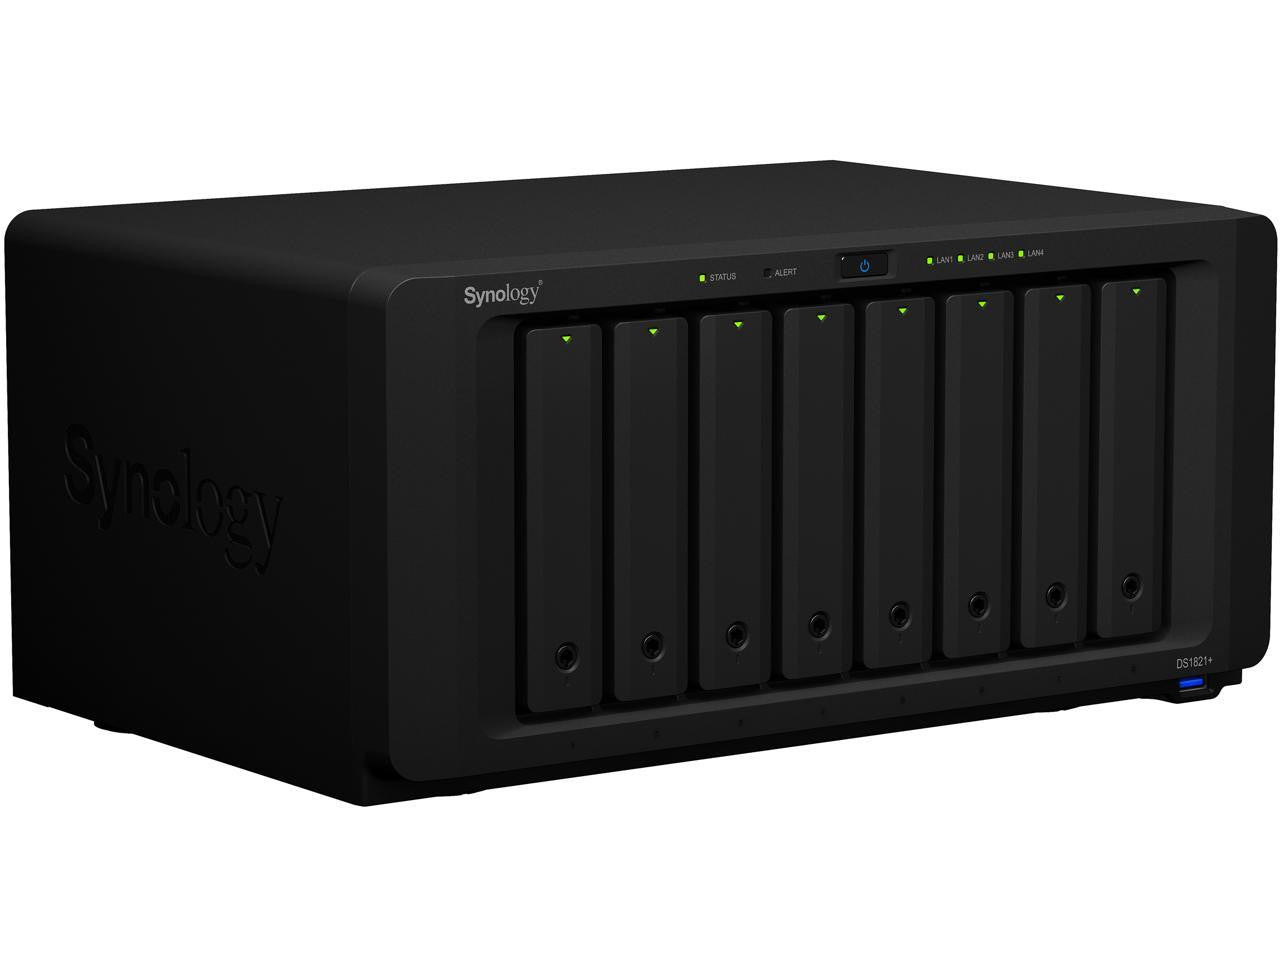 Synology DS1821+ 8-BAY DiskStation with 16GB Synology RAM and 48TB (8x6TB) Western Digital RED PLUS Drives Fully Assembled and Tested